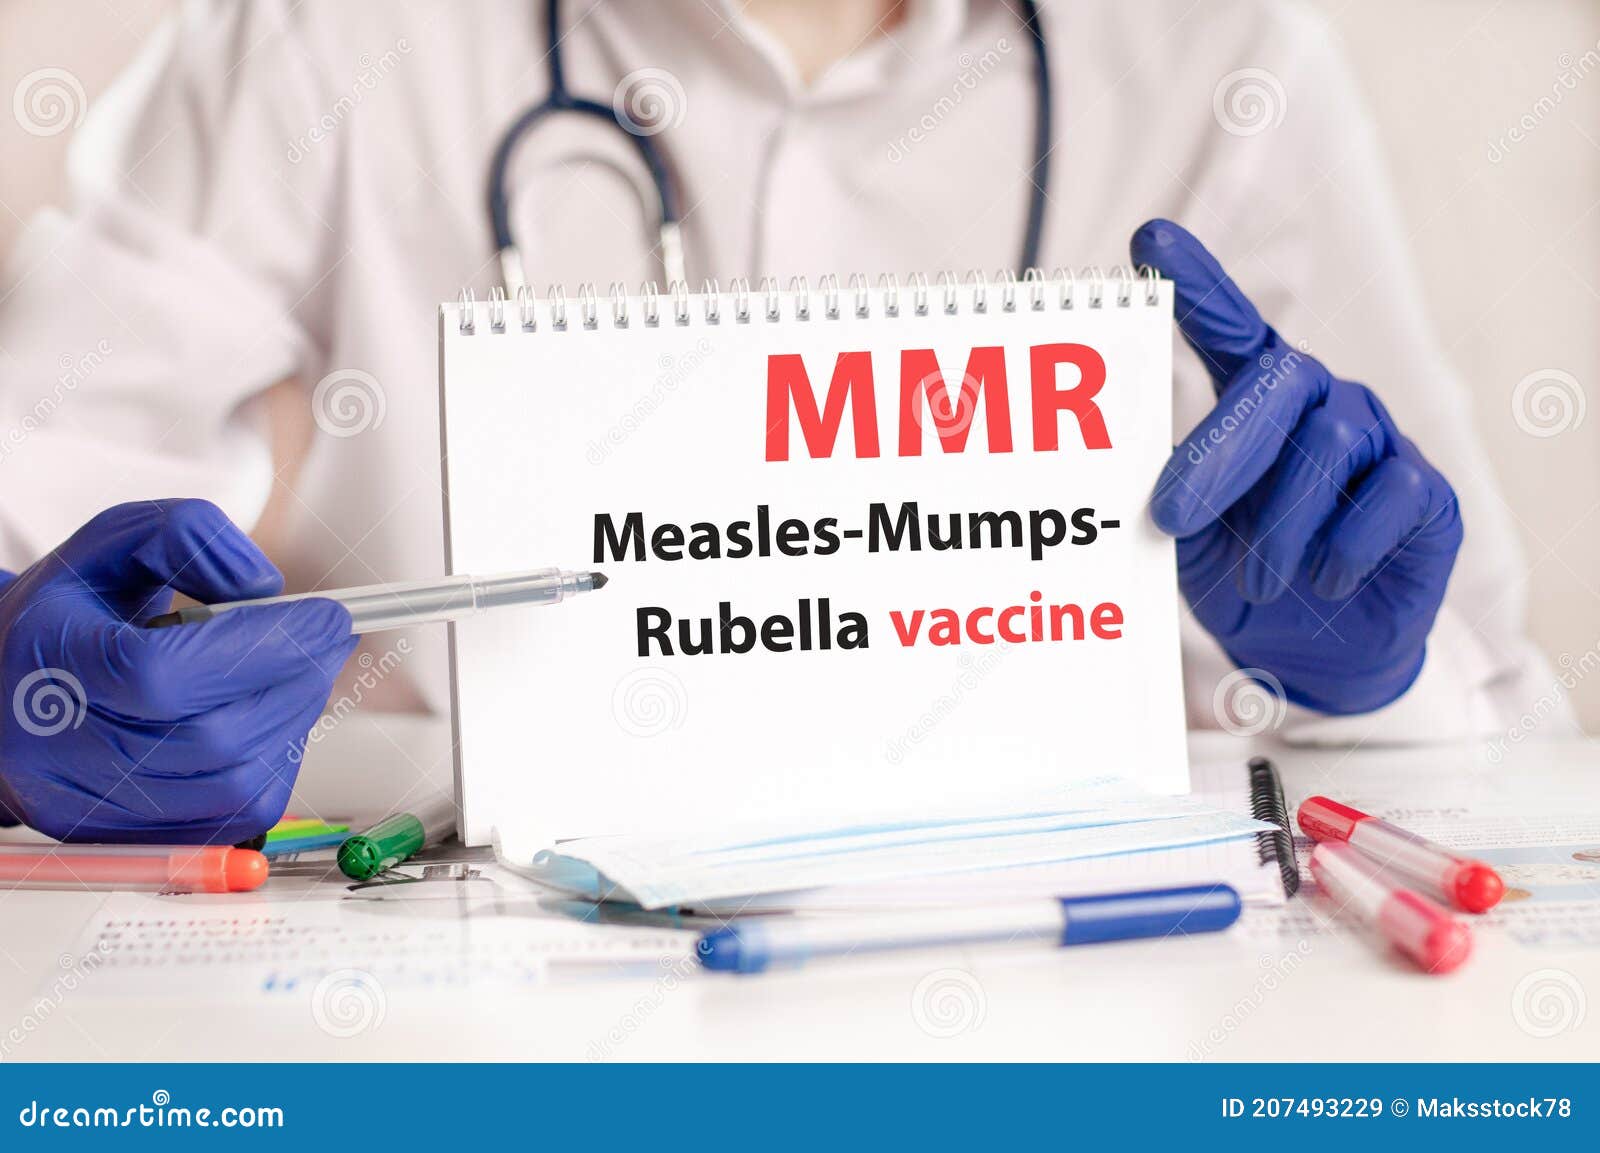 doctor holding a card with diagnosis words mmr - measles-mumps-rubella vaccine research. healthcare medical concept.